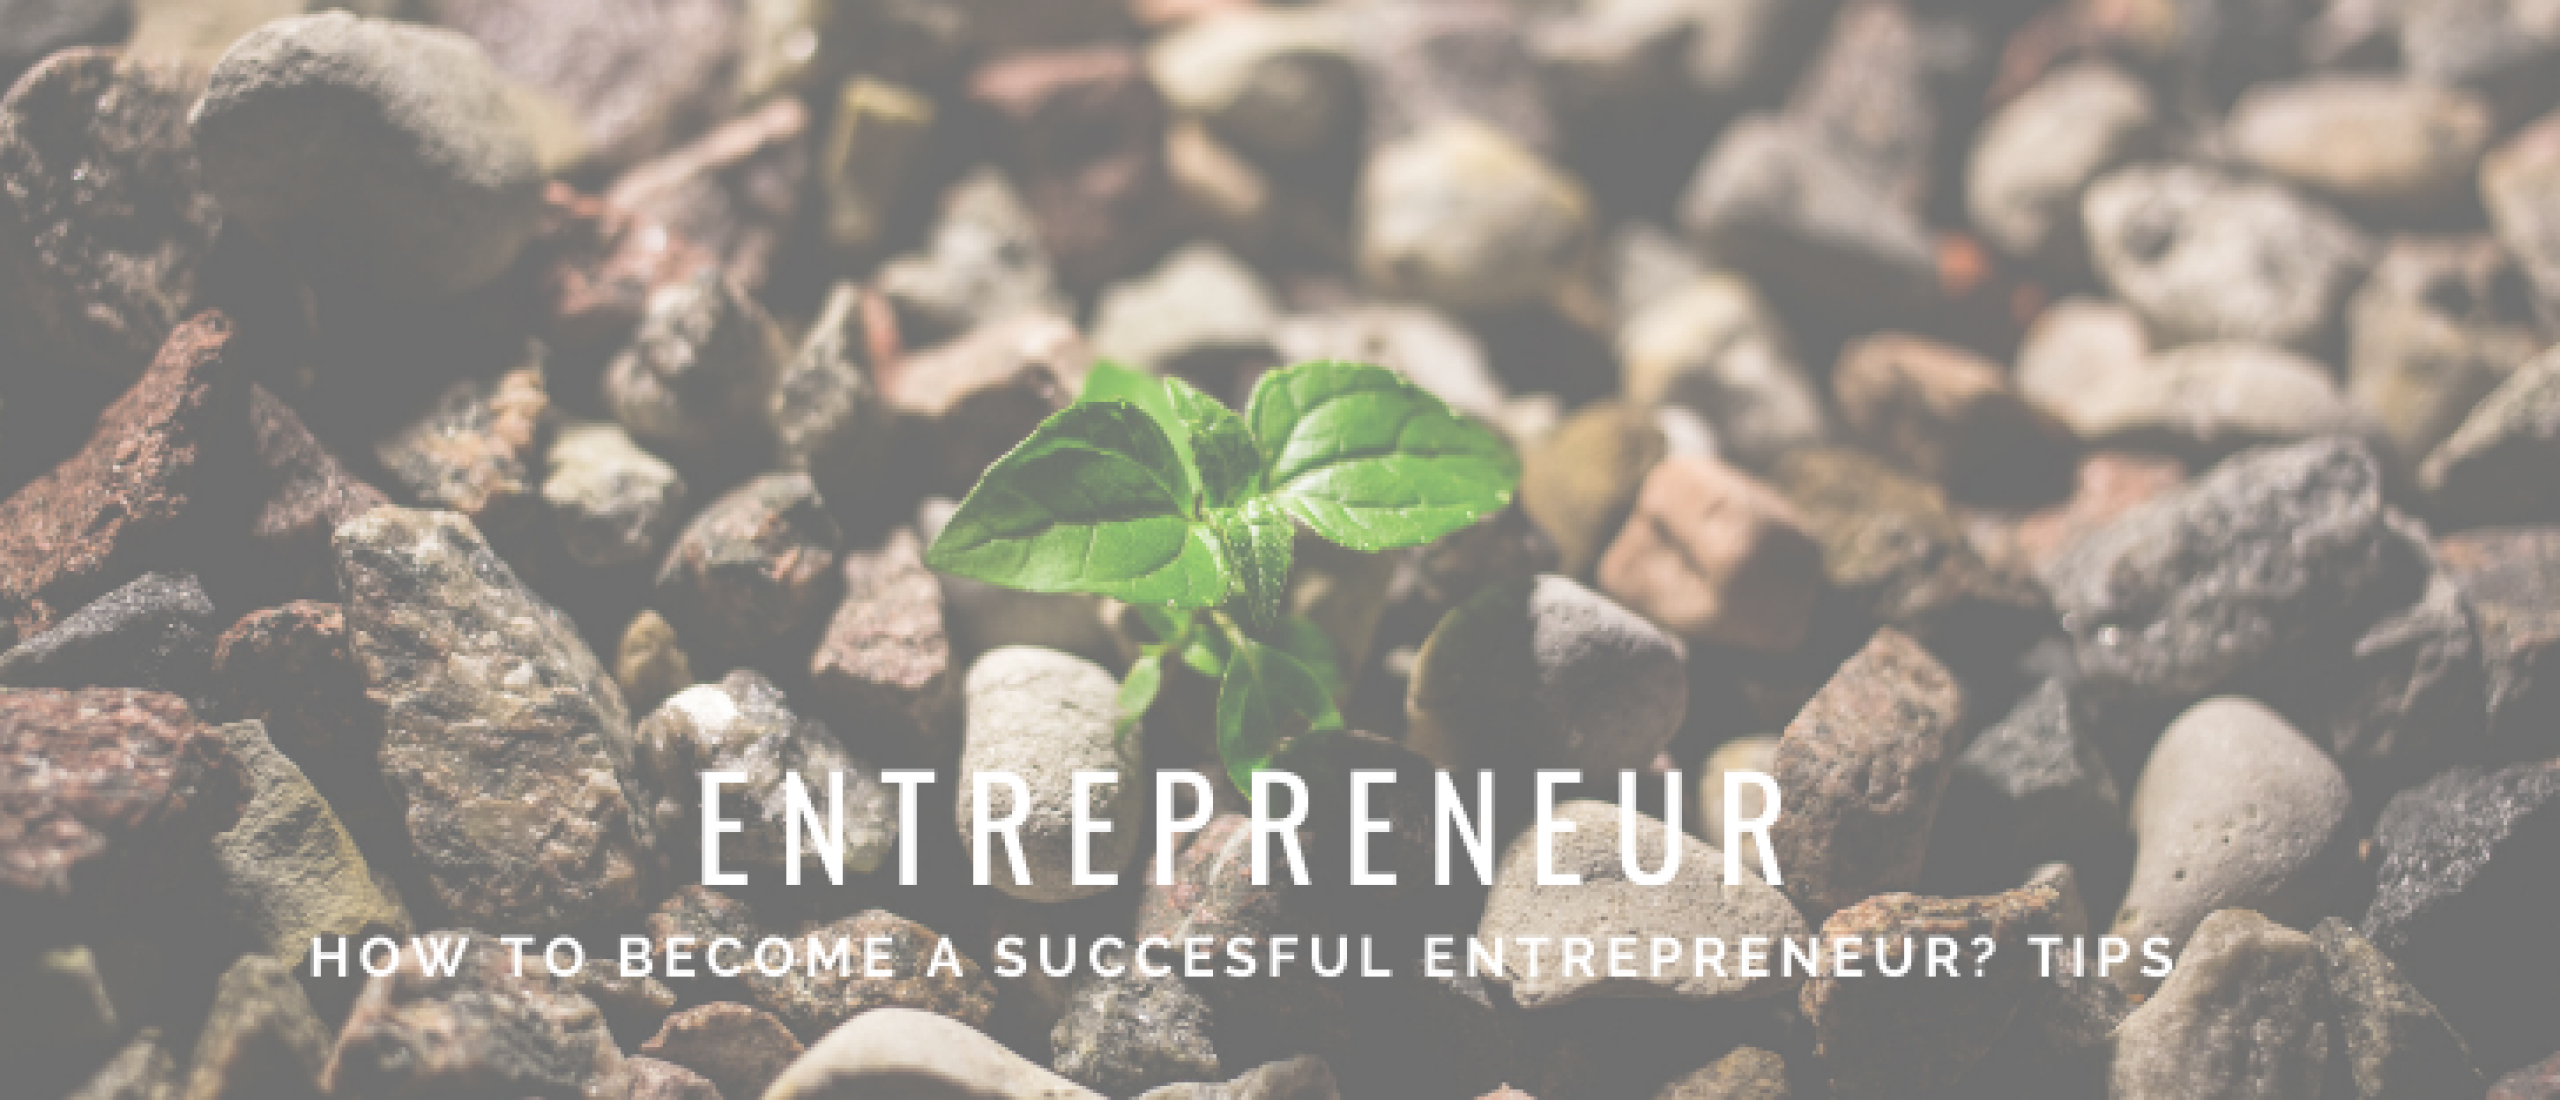 How to Become a Successful Entrepreneur? 10 Tips